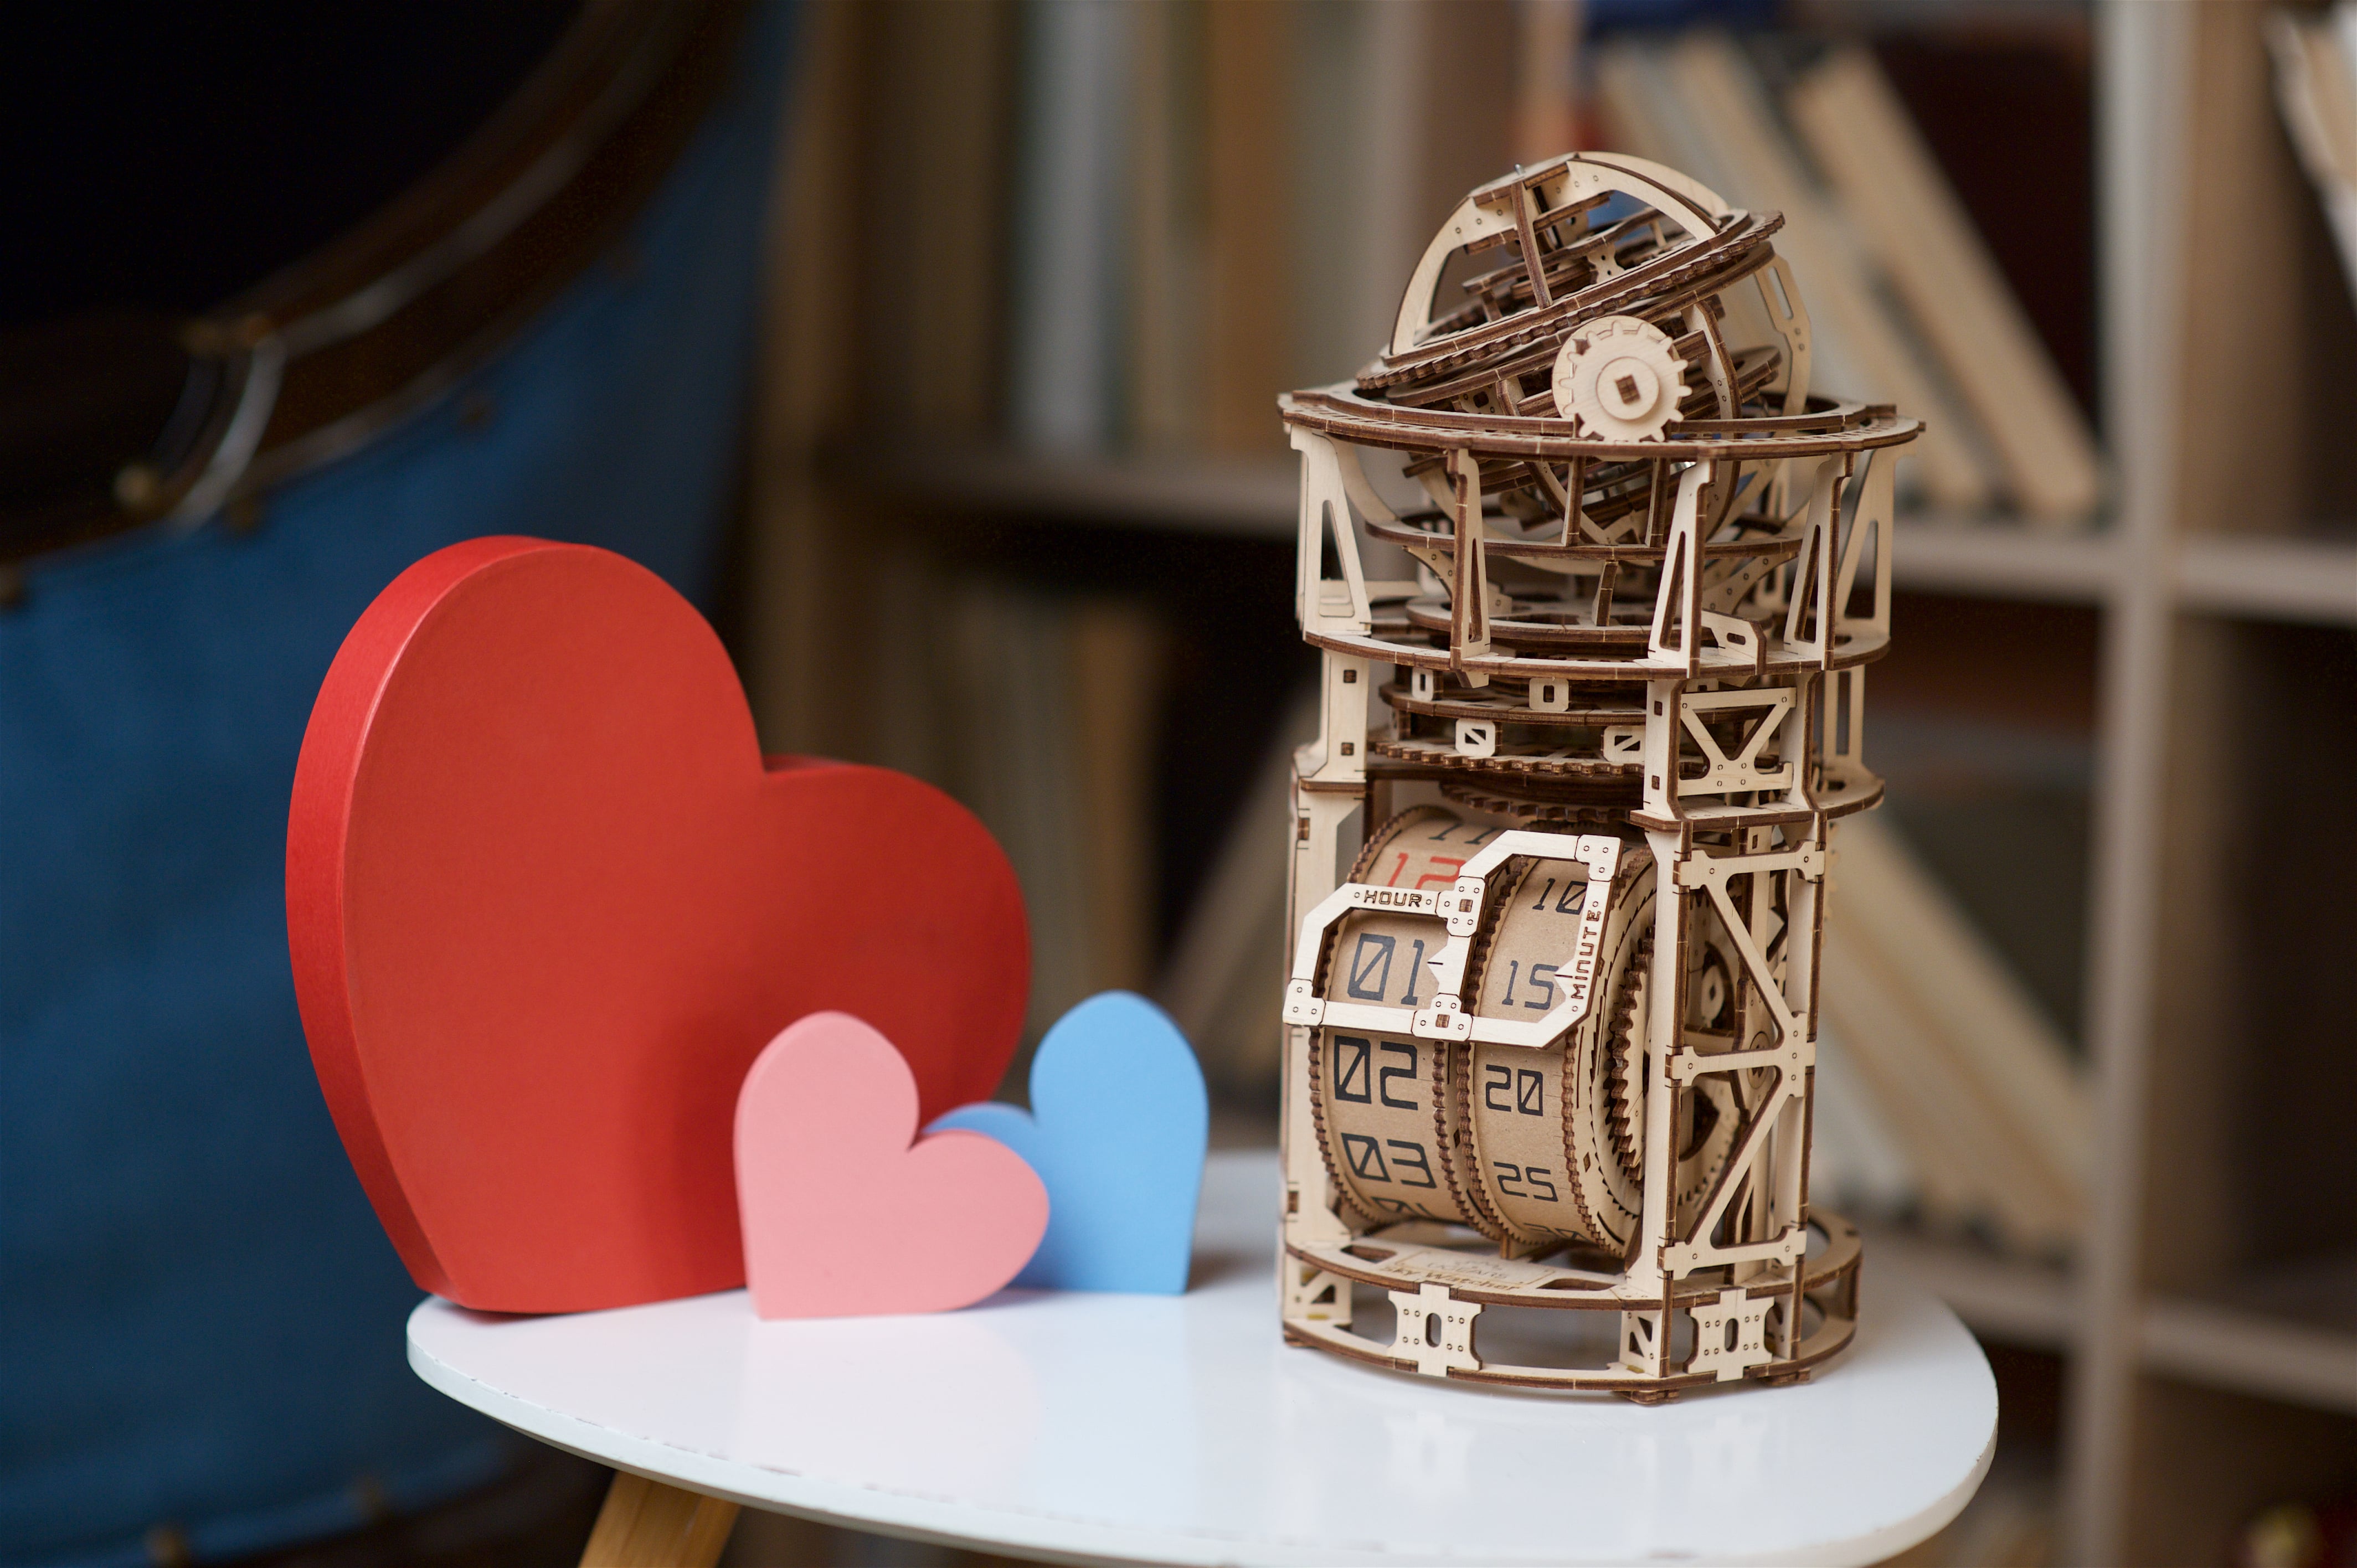 Dear Ugears family, The holiday of love is coming! If you're looking for original gifts for your loved ones we're here to help. We've put together a list of 14 great wooden mechanical DIY models we think will make great Valentine's gifts, and we're giving 14% off in honor of February 14. Build and enjoy Ugears models together—on Valentine's Day and throughout the year! Offer valid February 1-14. Happy Valentine's Day! Love rules the world!